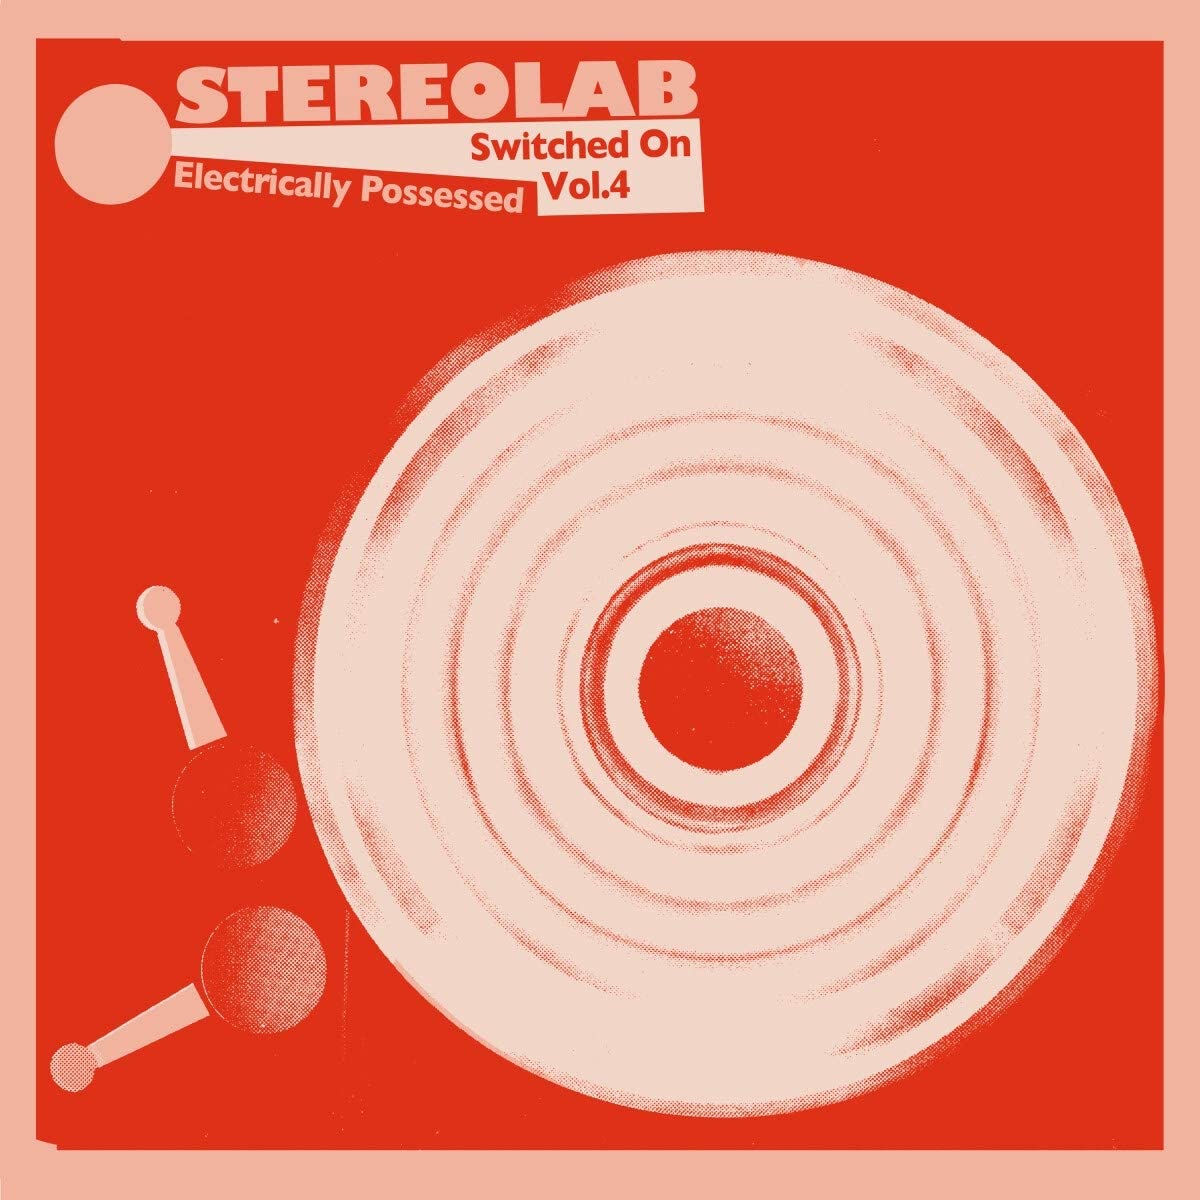 Stereolab/Electrically Possessed: Switched On Vol. 4 (Black Vinyl) [LP]